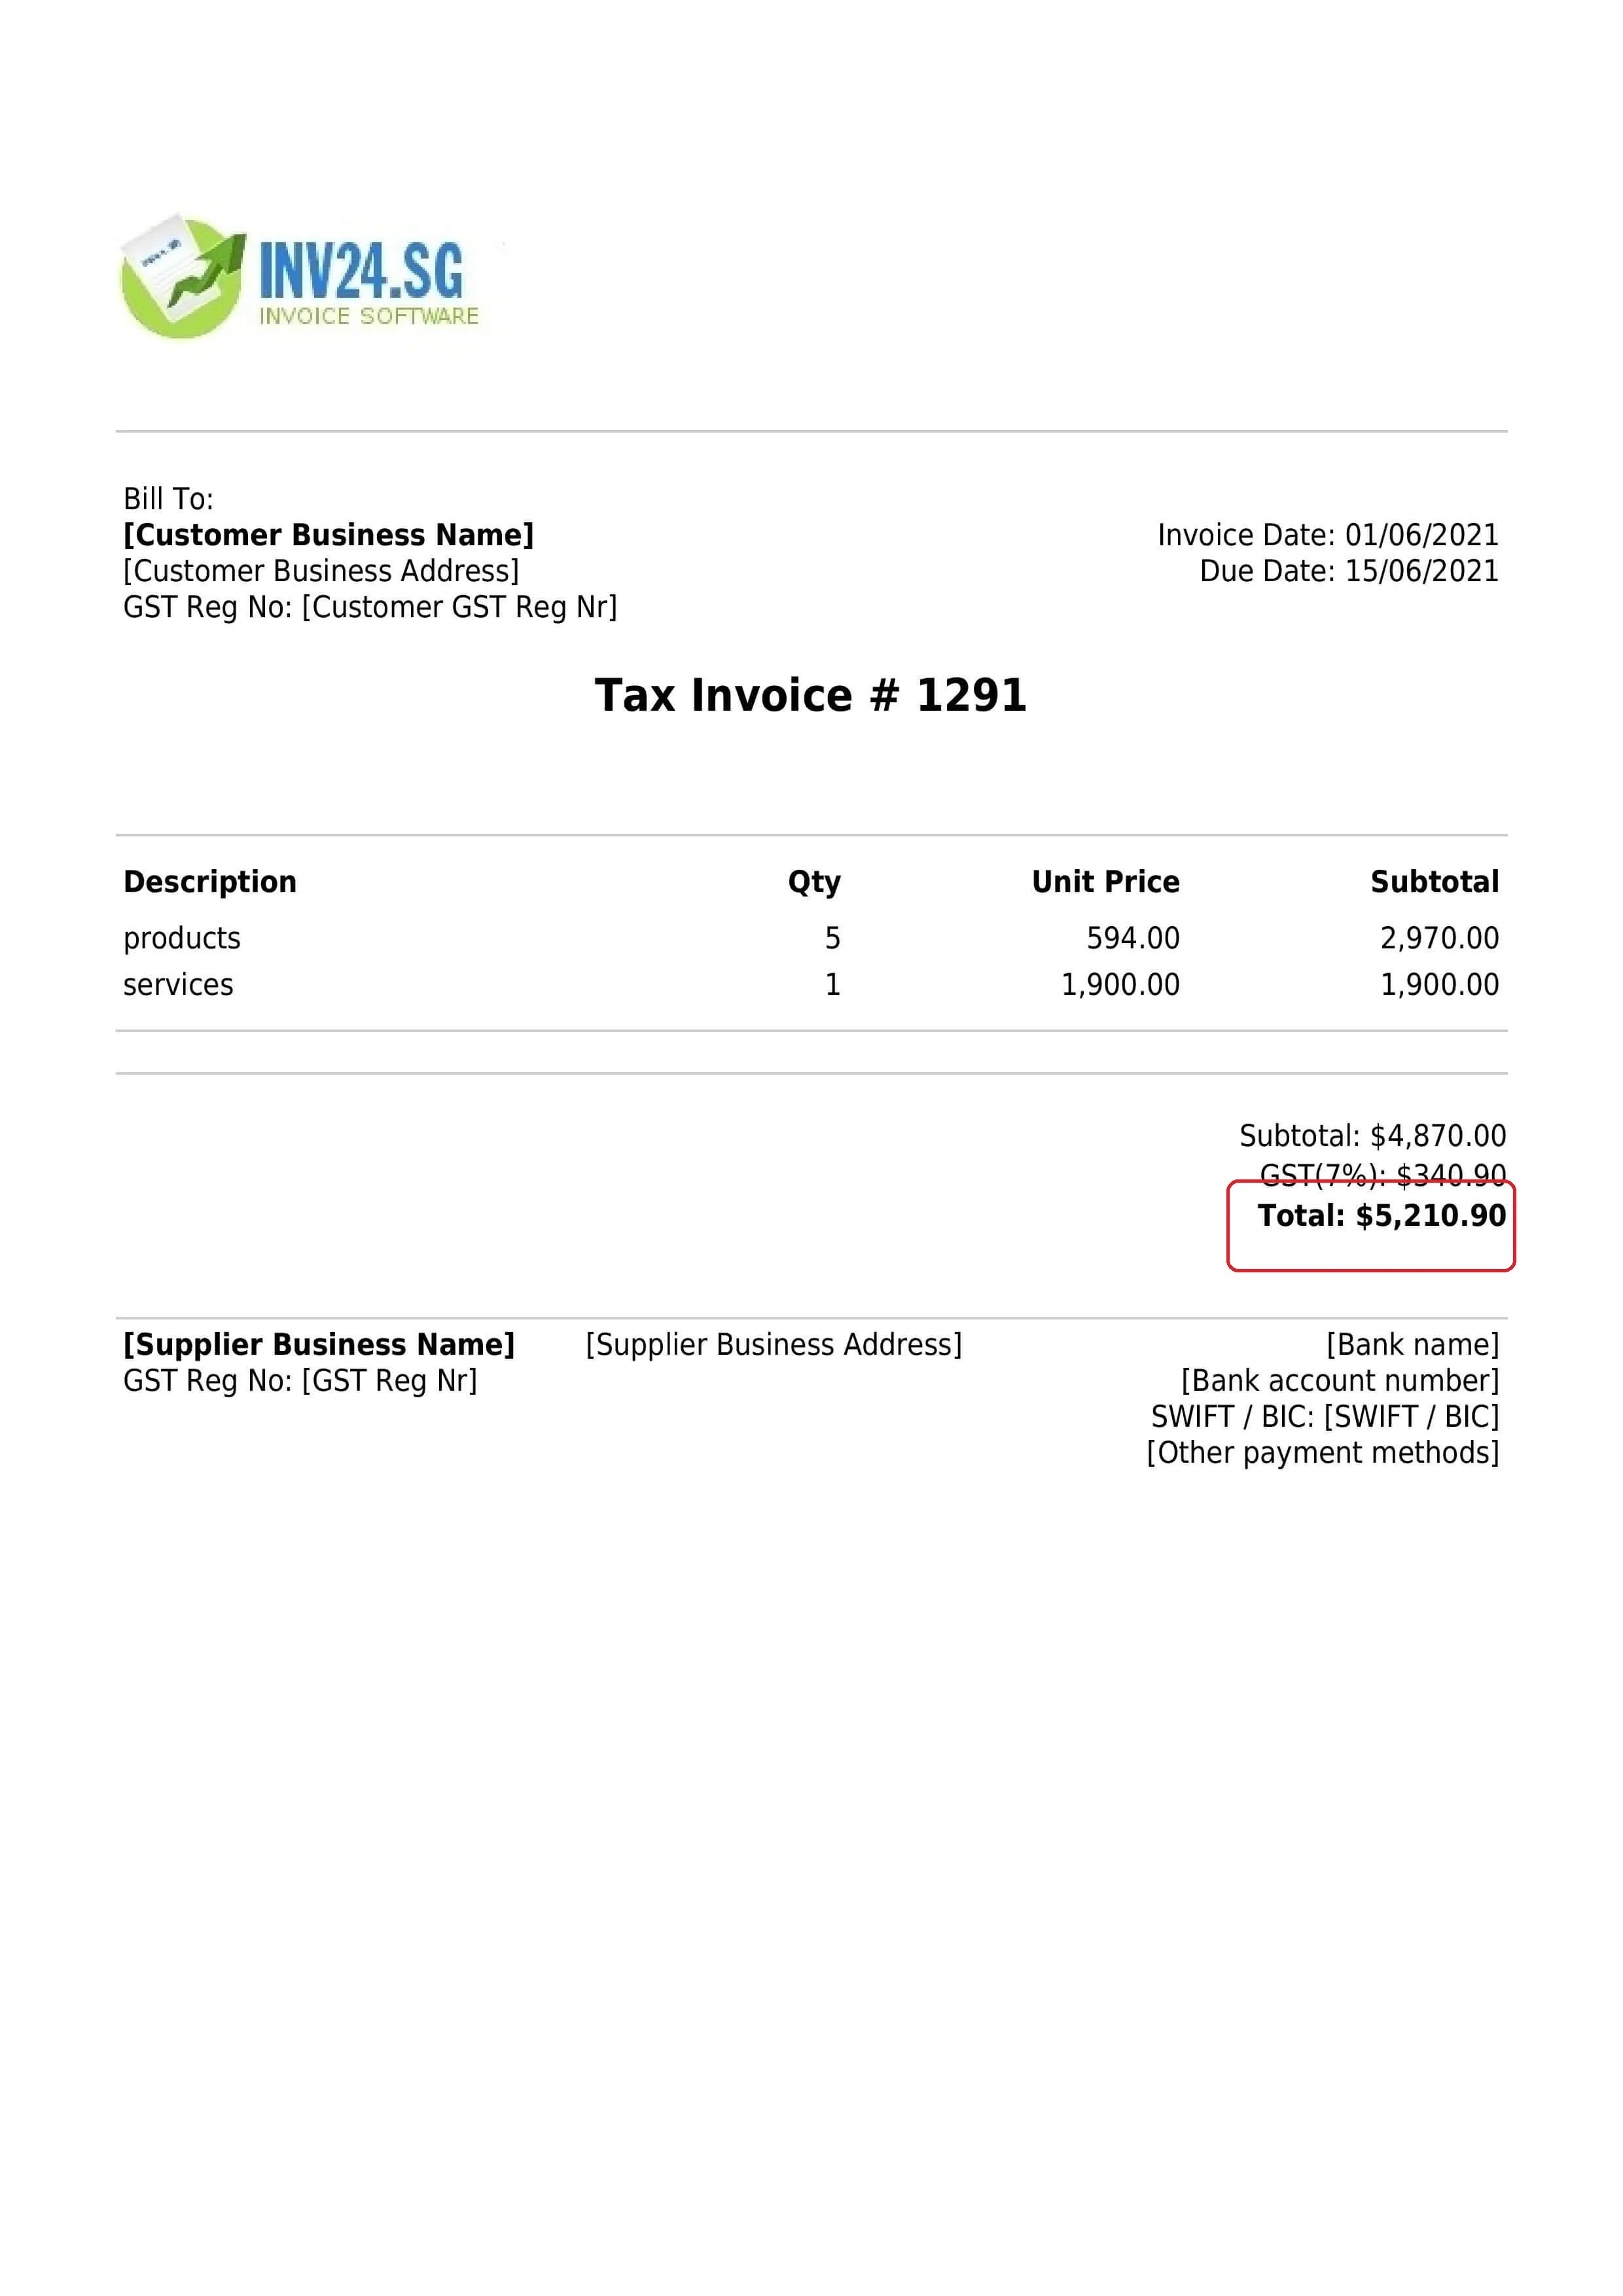 invoice total / gross amount